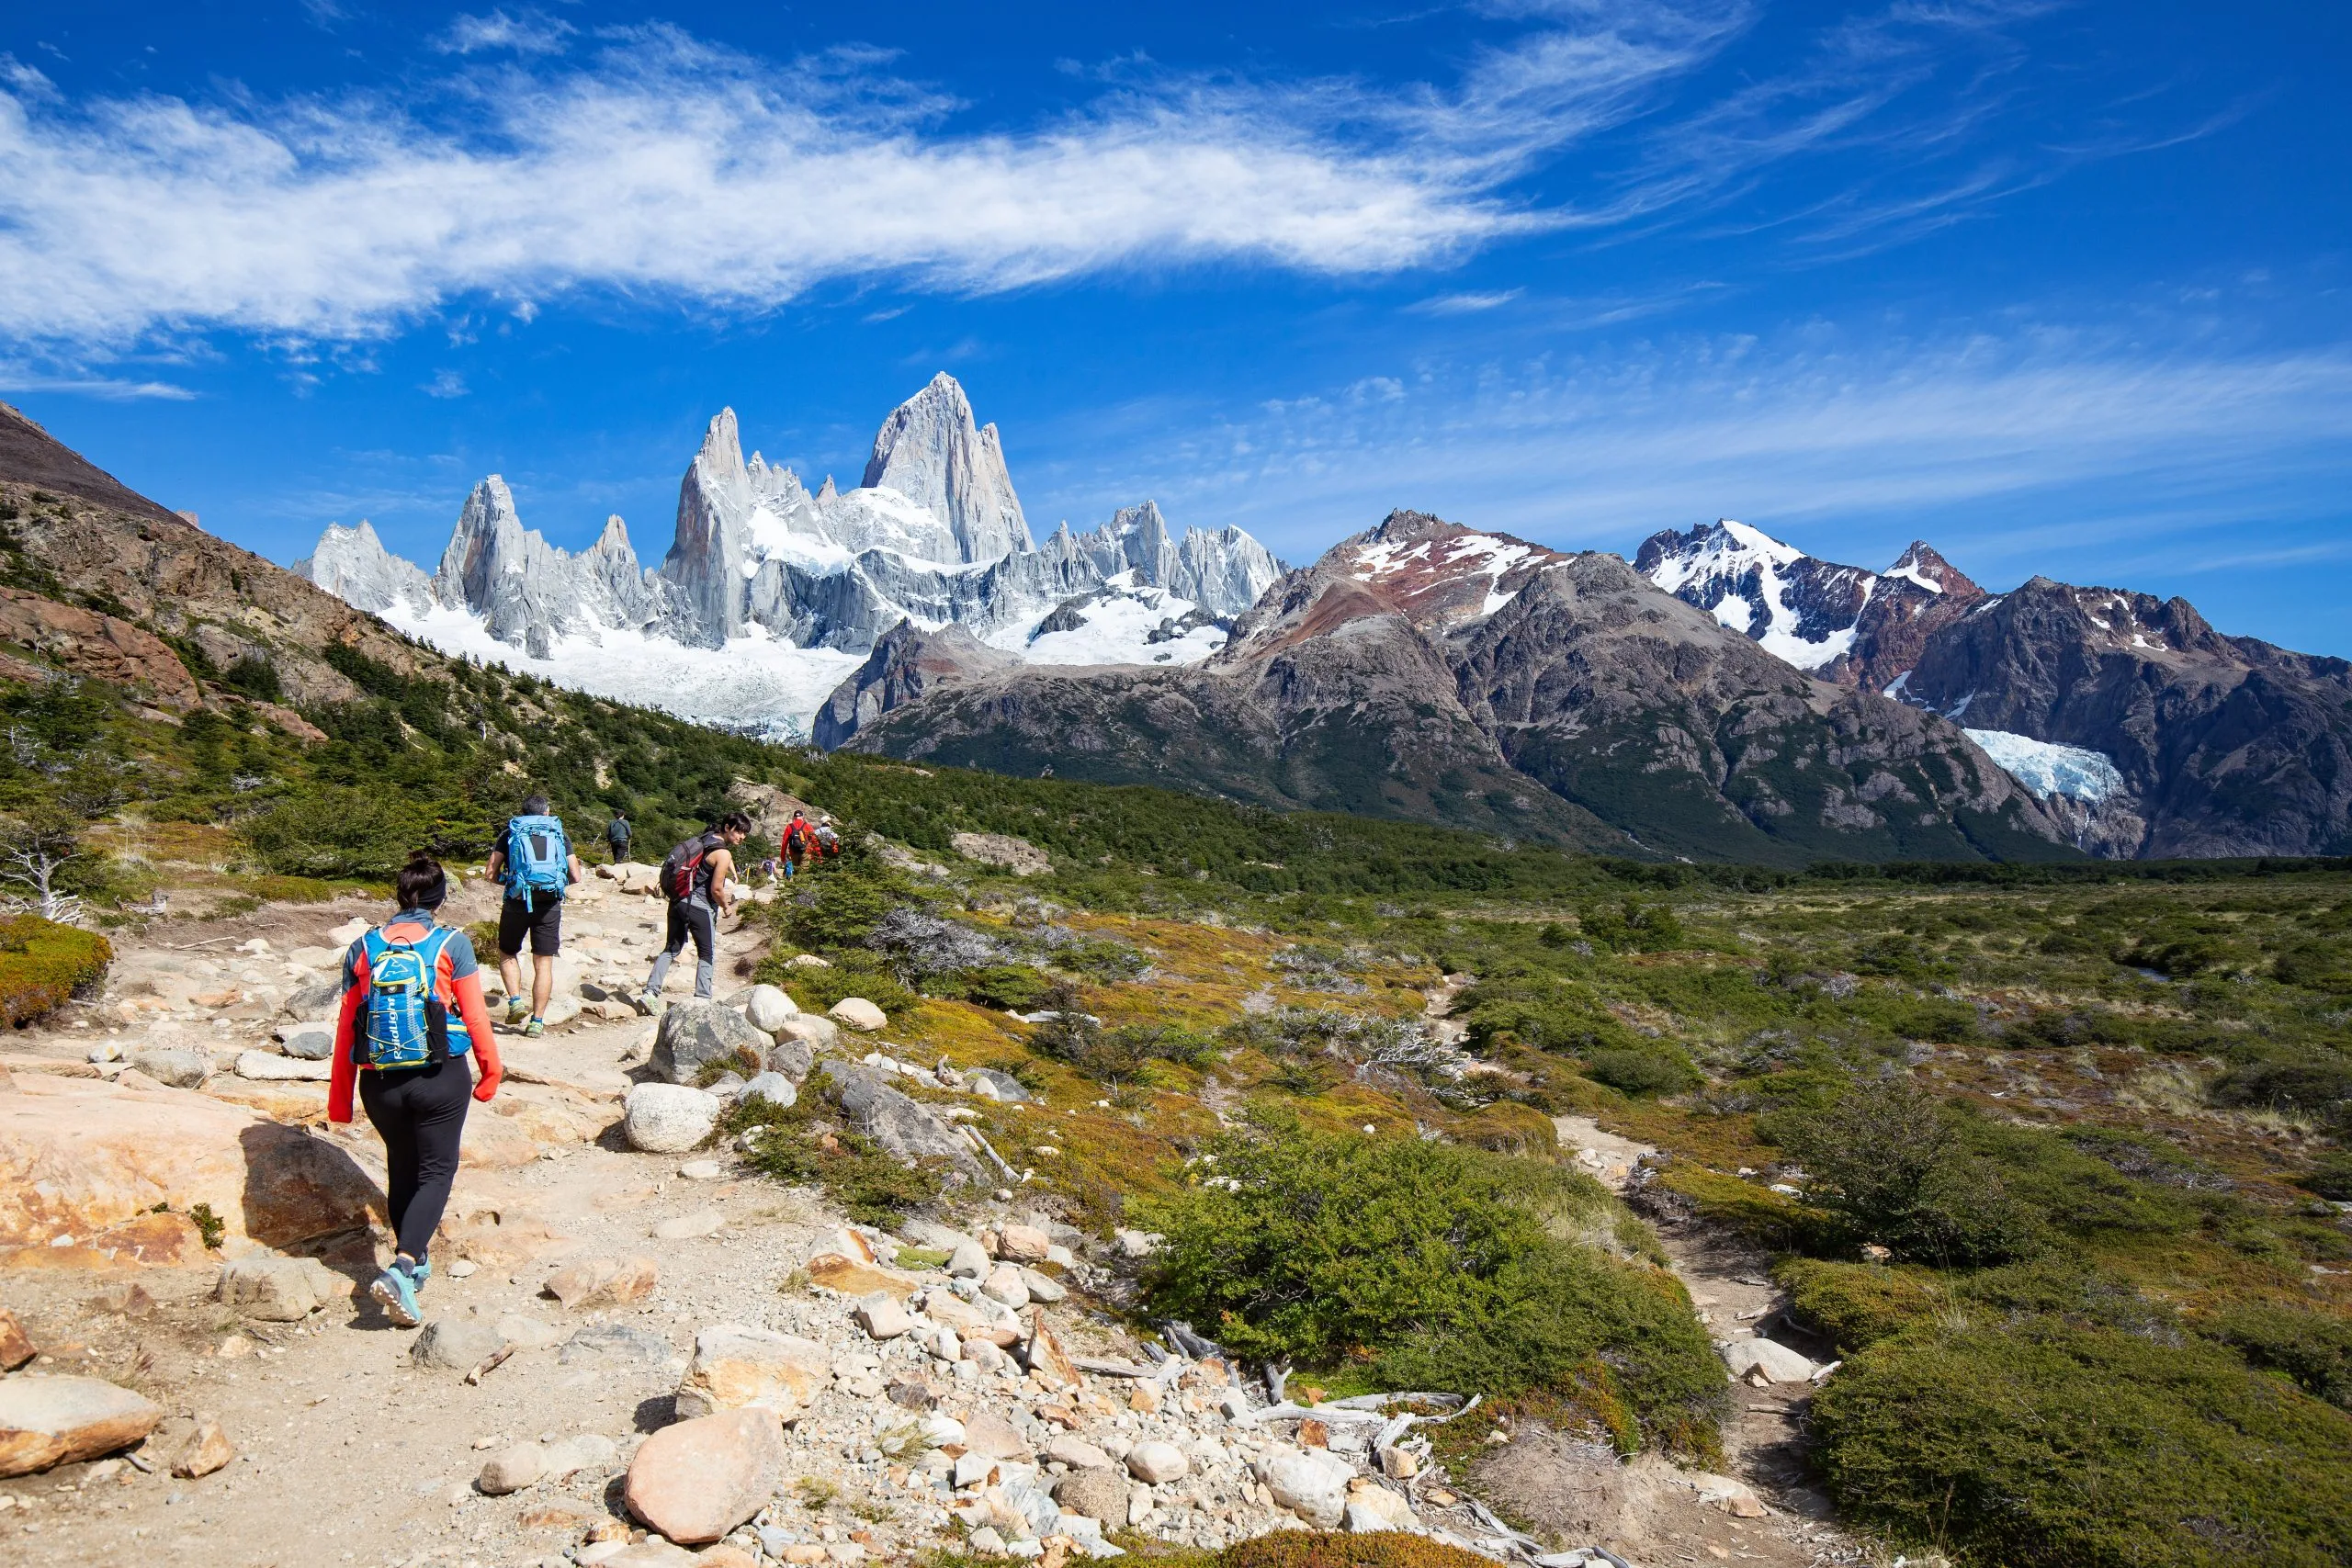 EL CHALTEN, ARGENTINA - CIRCA FEBRUARY 2020 - Tourists trekking along the friz roy trail in Patagonia, Argentina